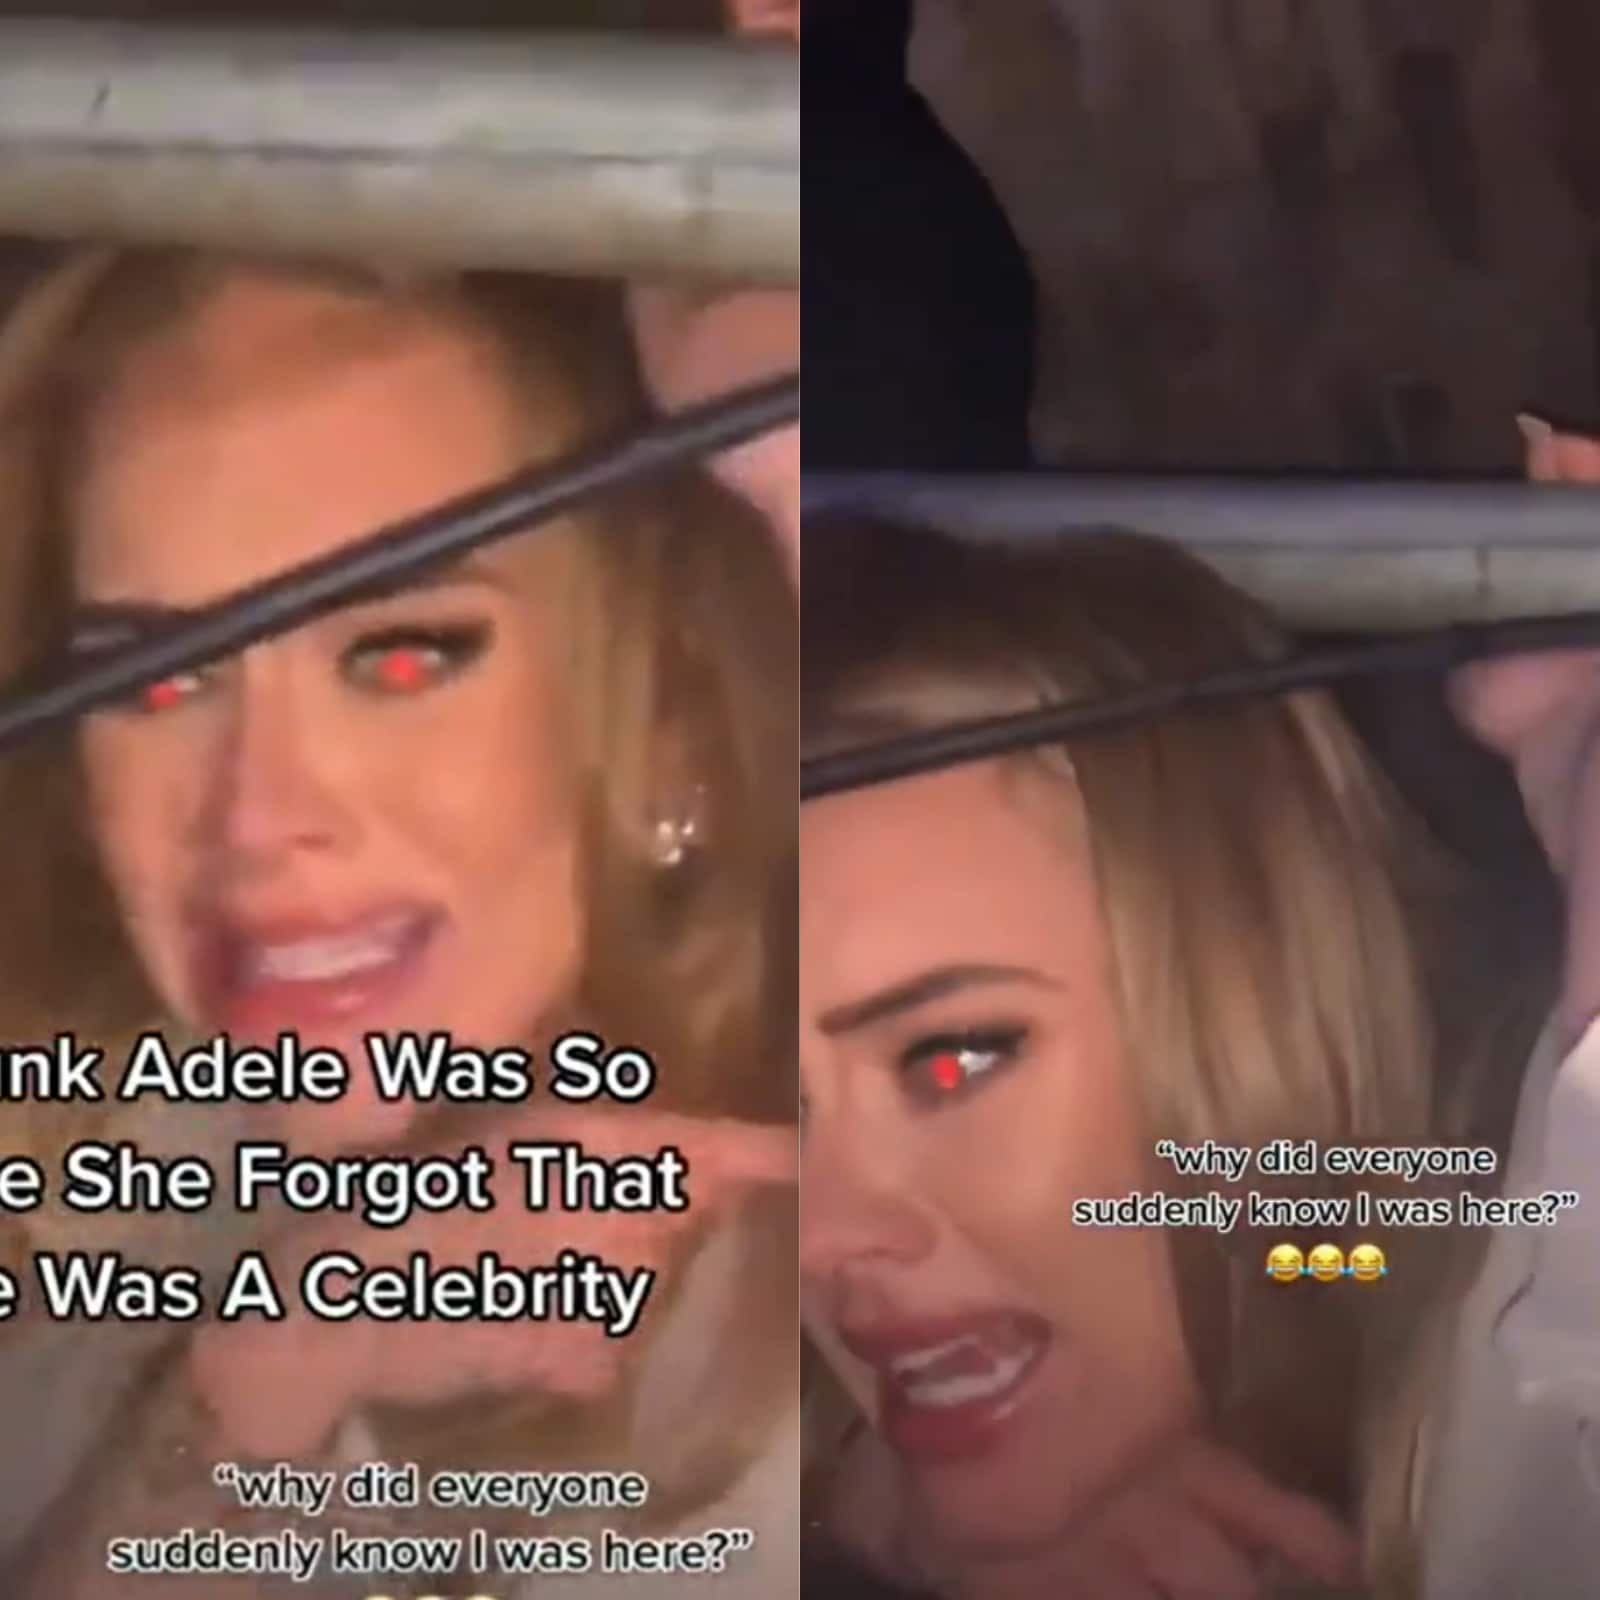 Drunk Porn - How Does Everyone Know?' Adele Temporarily Forgets She is Famous During ' Drunk' Night Out